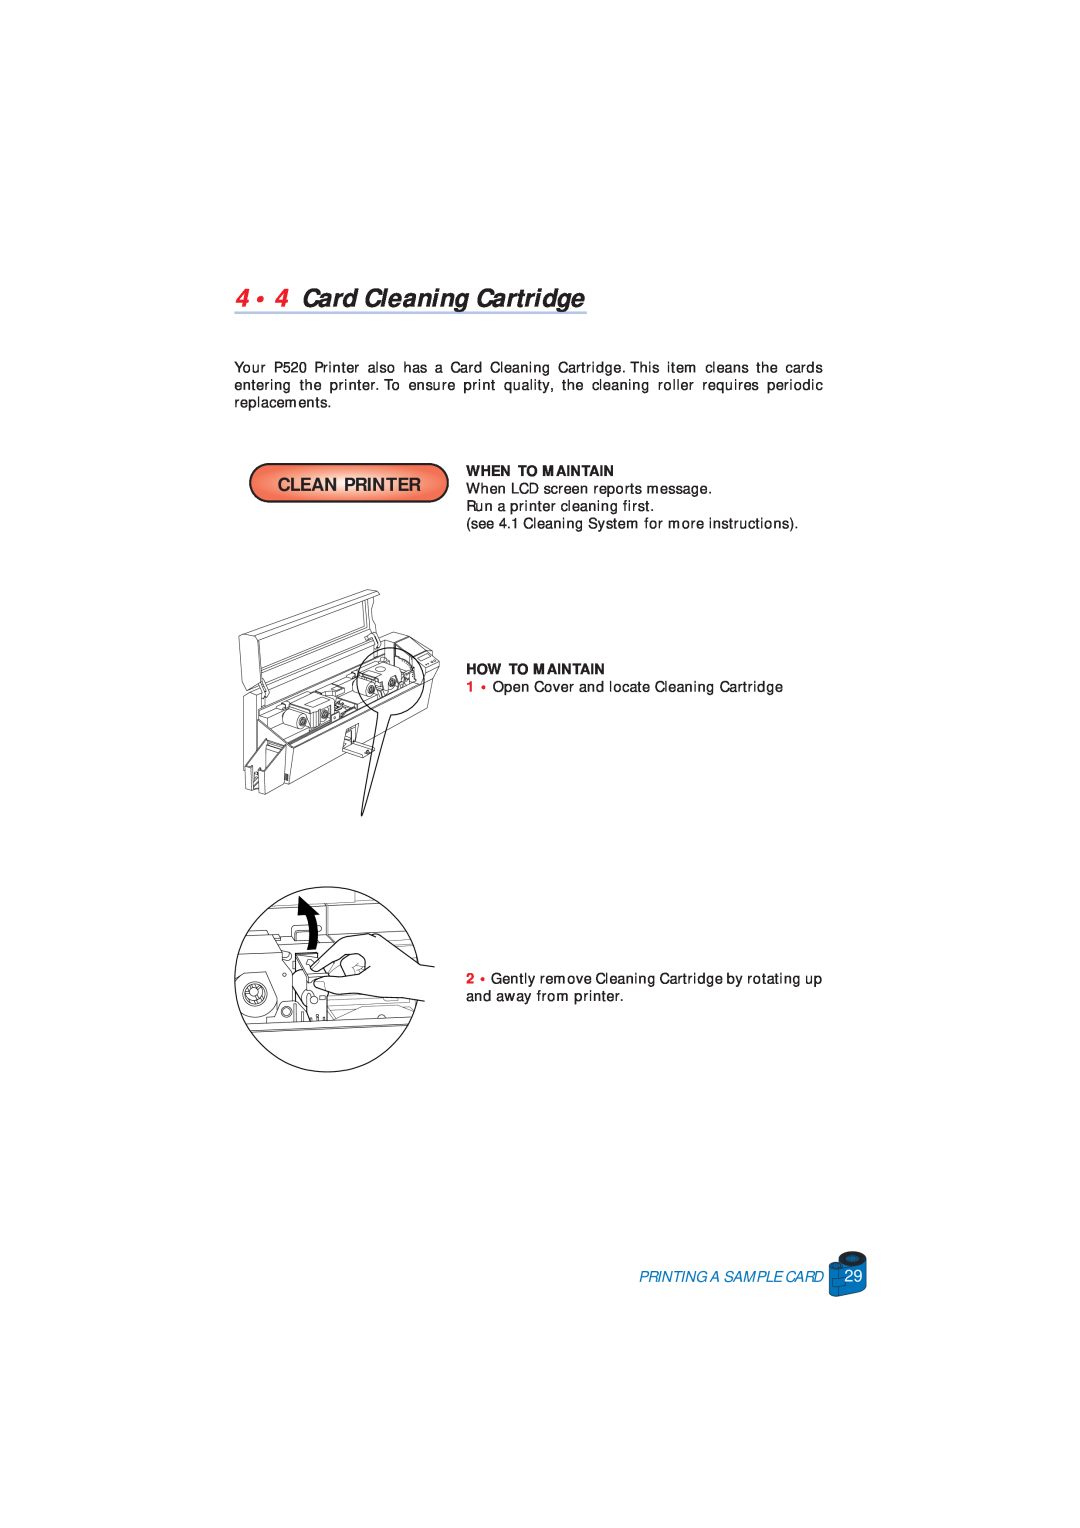 Zebra Technologies P520 user manual 4 4 Card Cleaning Cartridge, Clean Printer, Printing A Sample Card, When To Maintain 